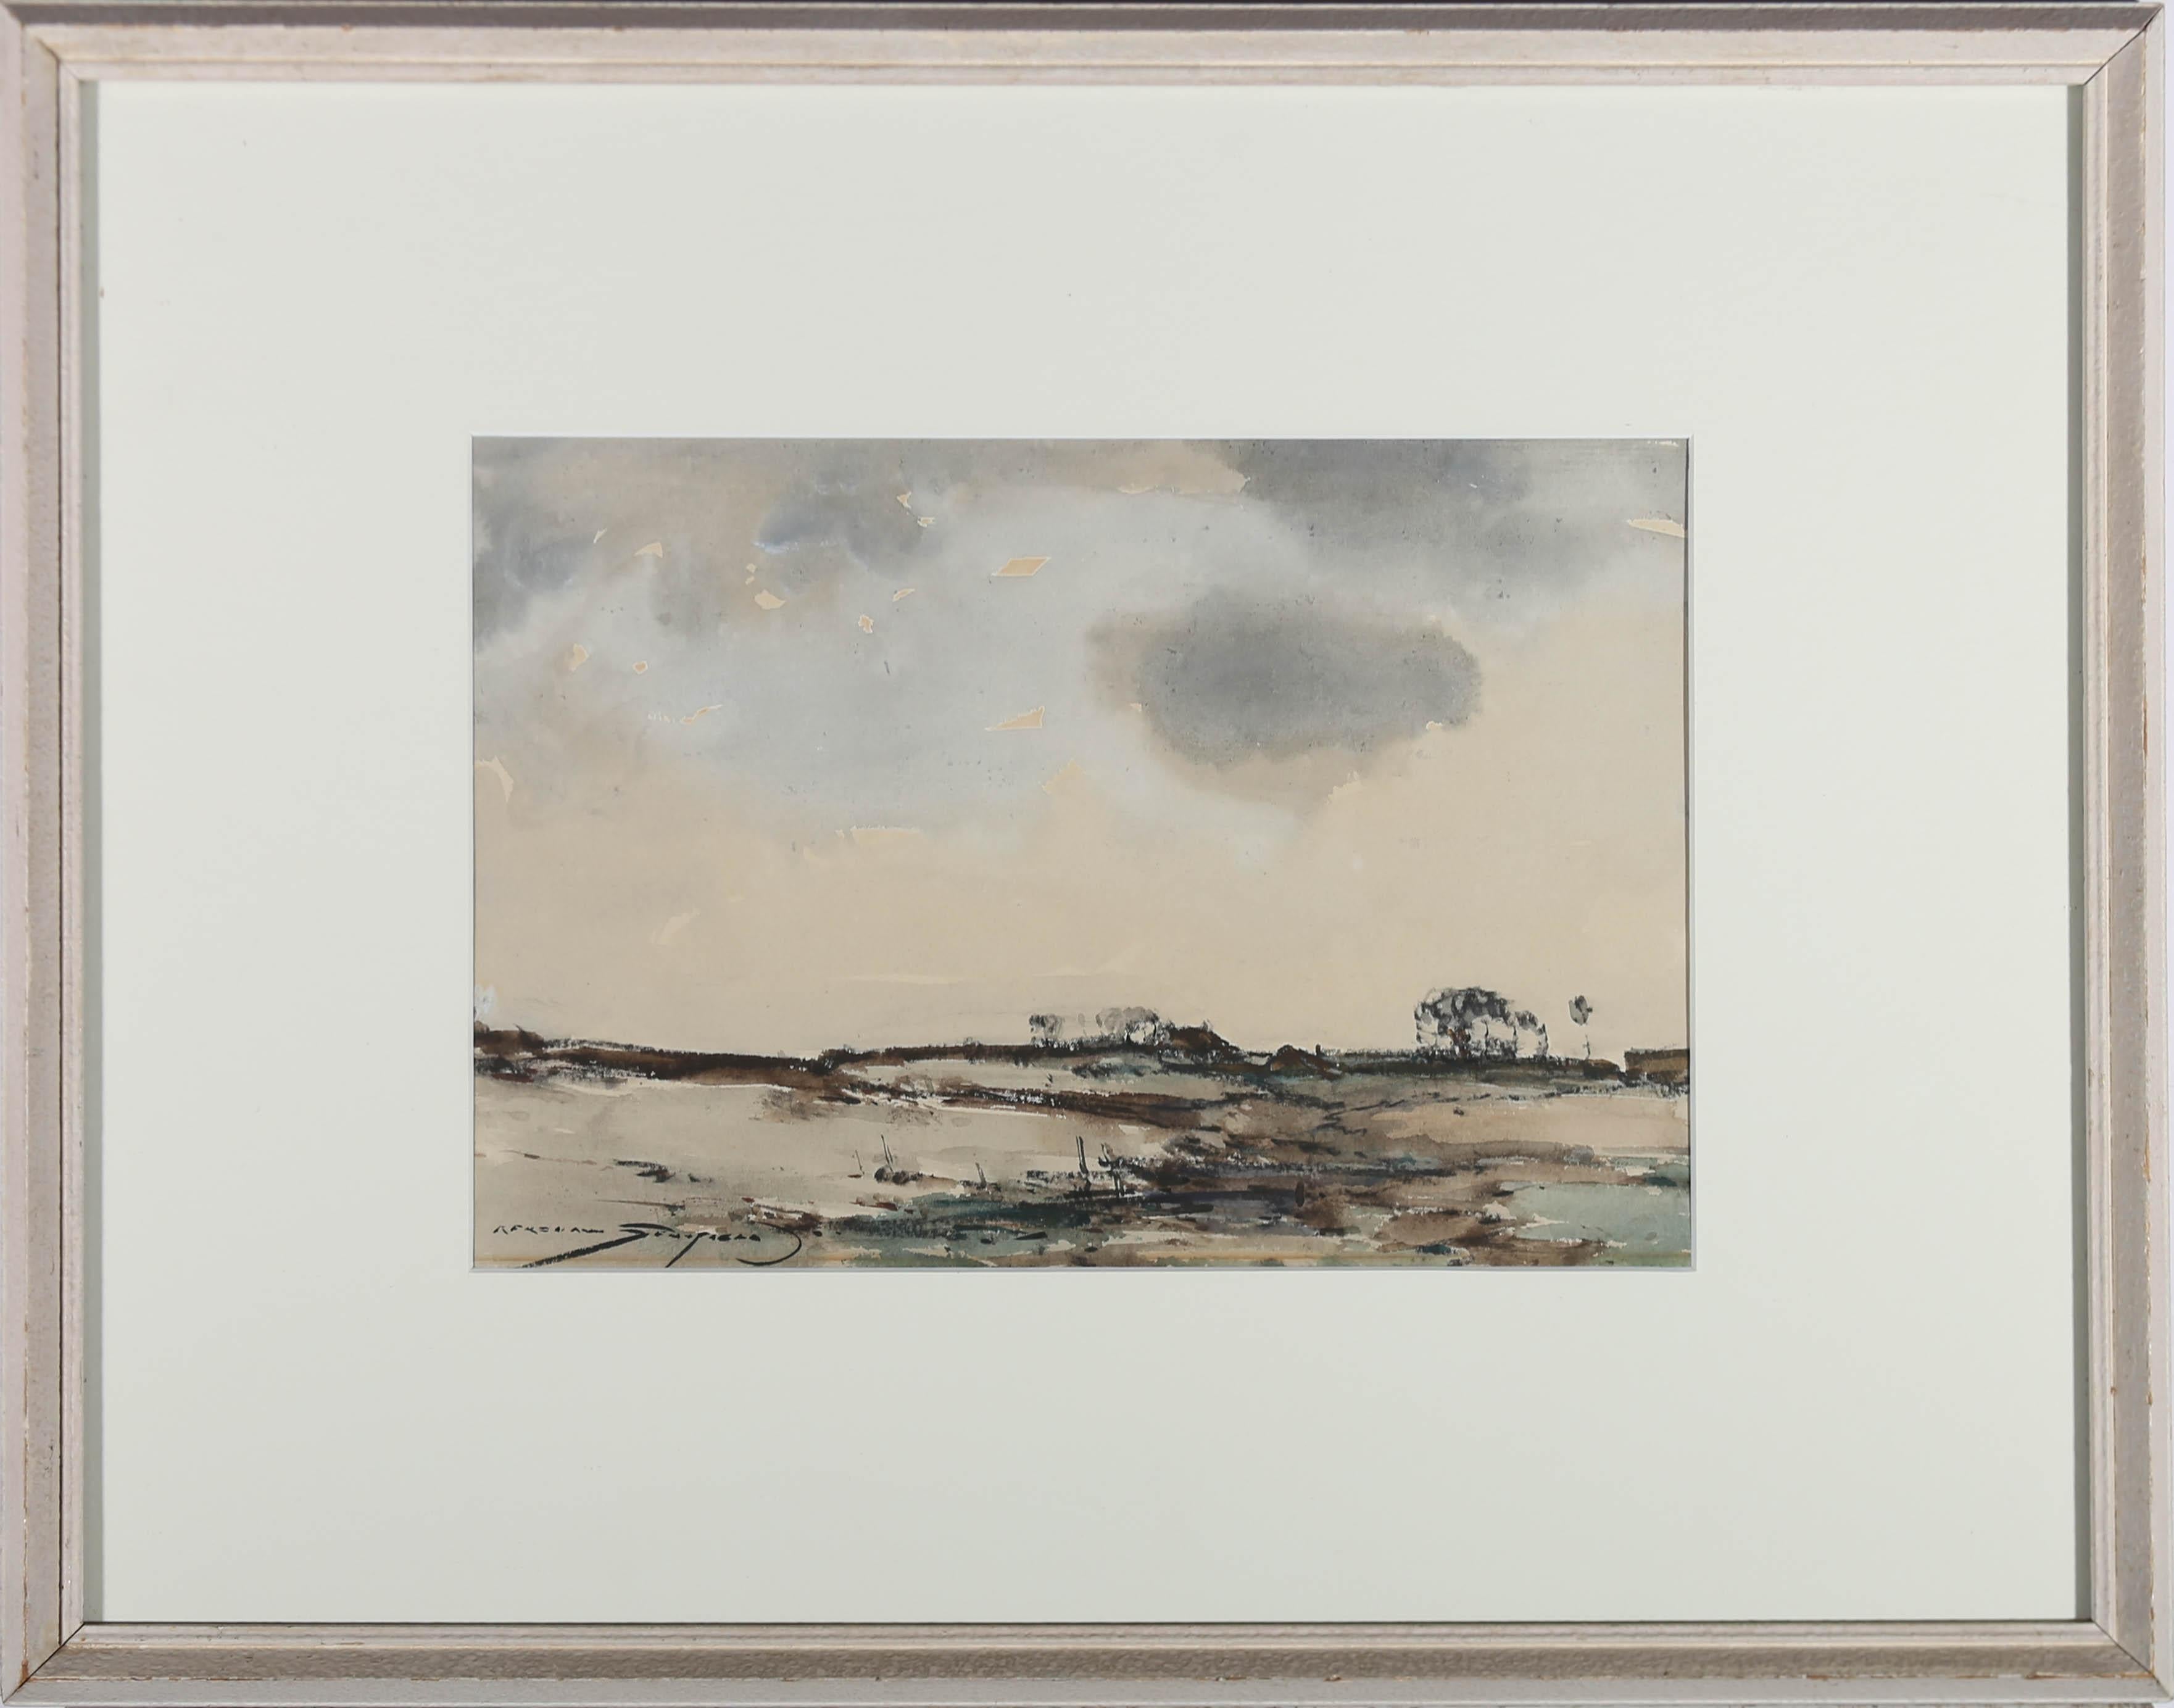 A fine watercolour study by the well listed artist, Kershaw Schofield. Depicted in this scene is an impressionistic, muted view, of the British countryside. Signed to the lower right. Presented in a white card mount and contemporary matt, off white